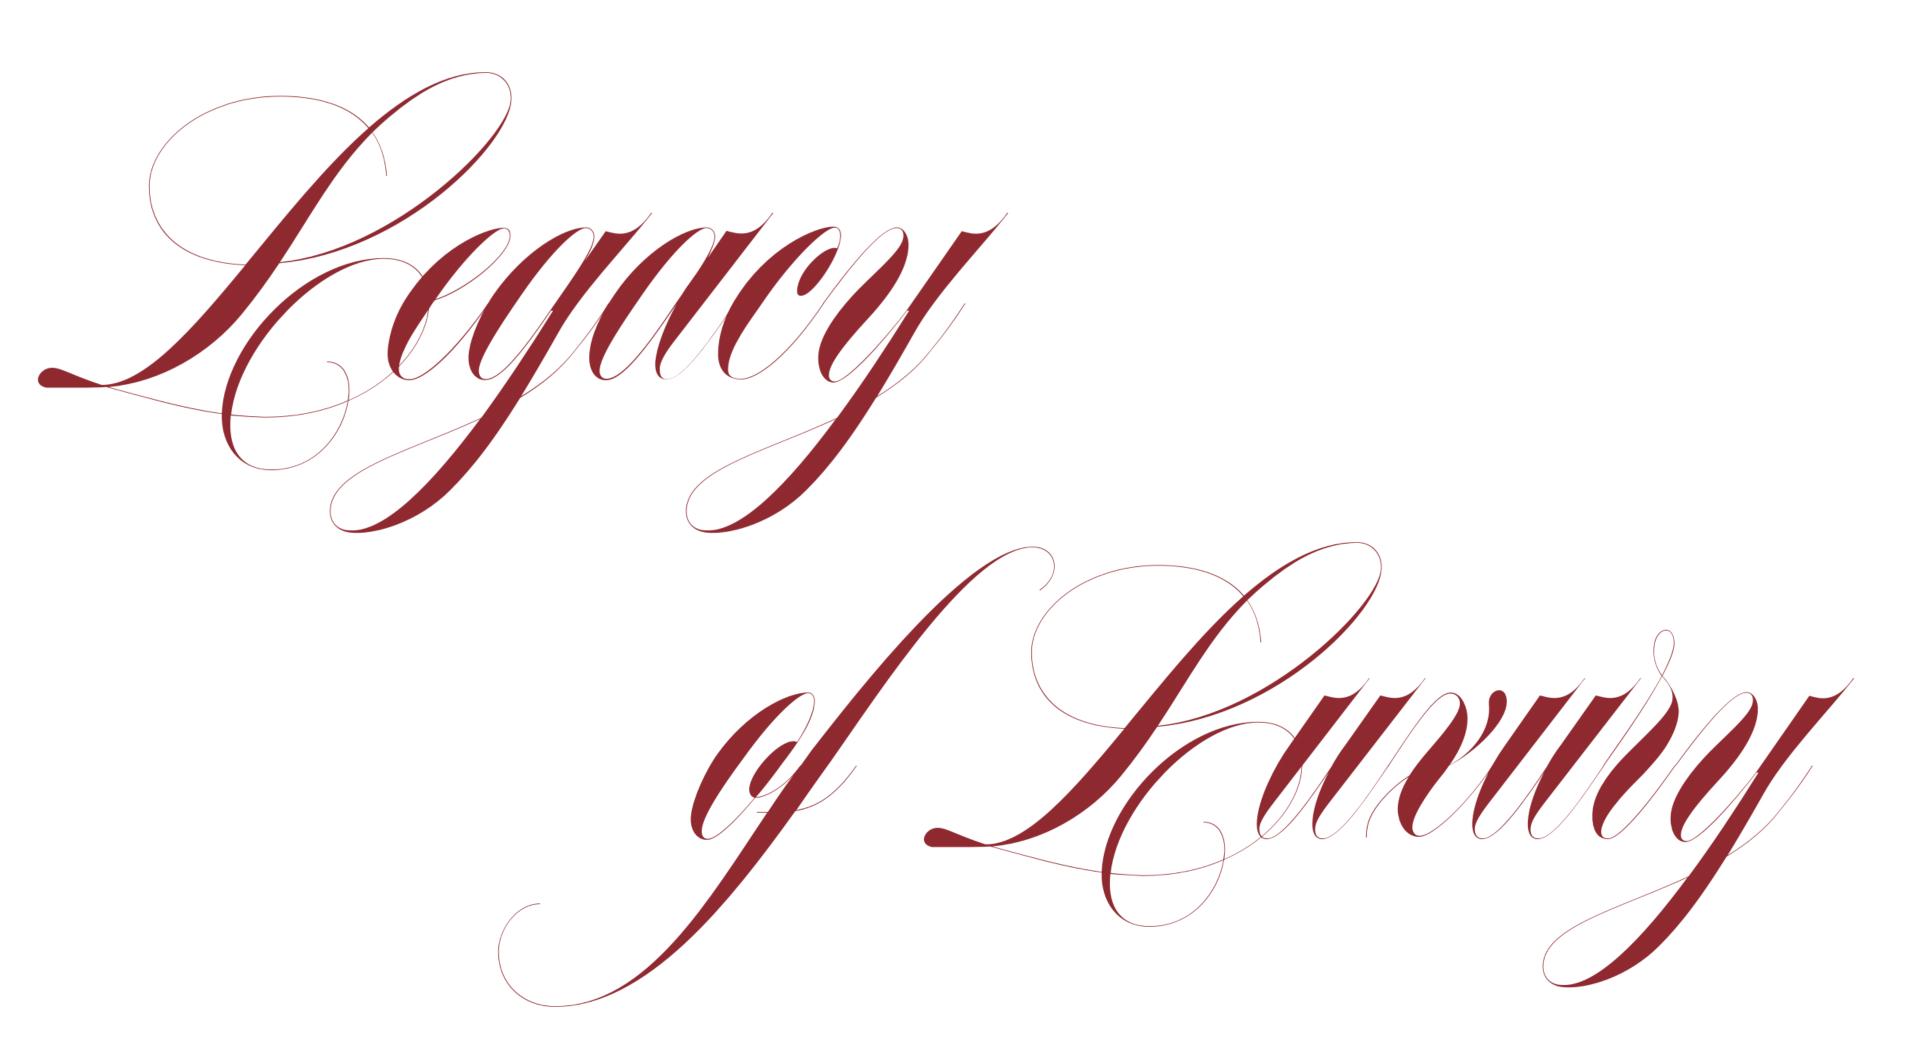 Legacy of Luxury title in cursive font